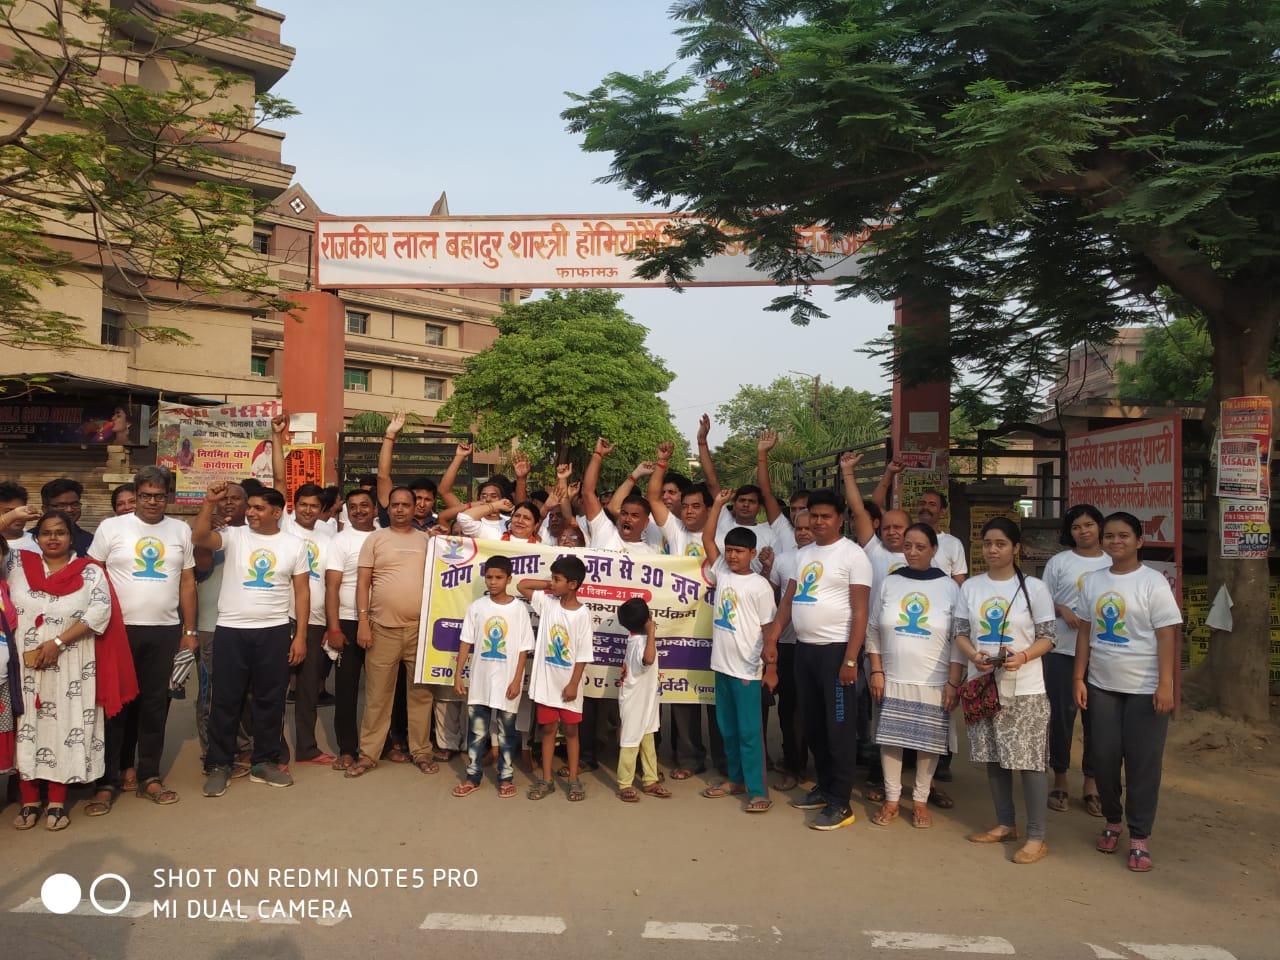 <h1><strong>5th International Yoga Day Celebration on 21 June 2019 </strong></h1>